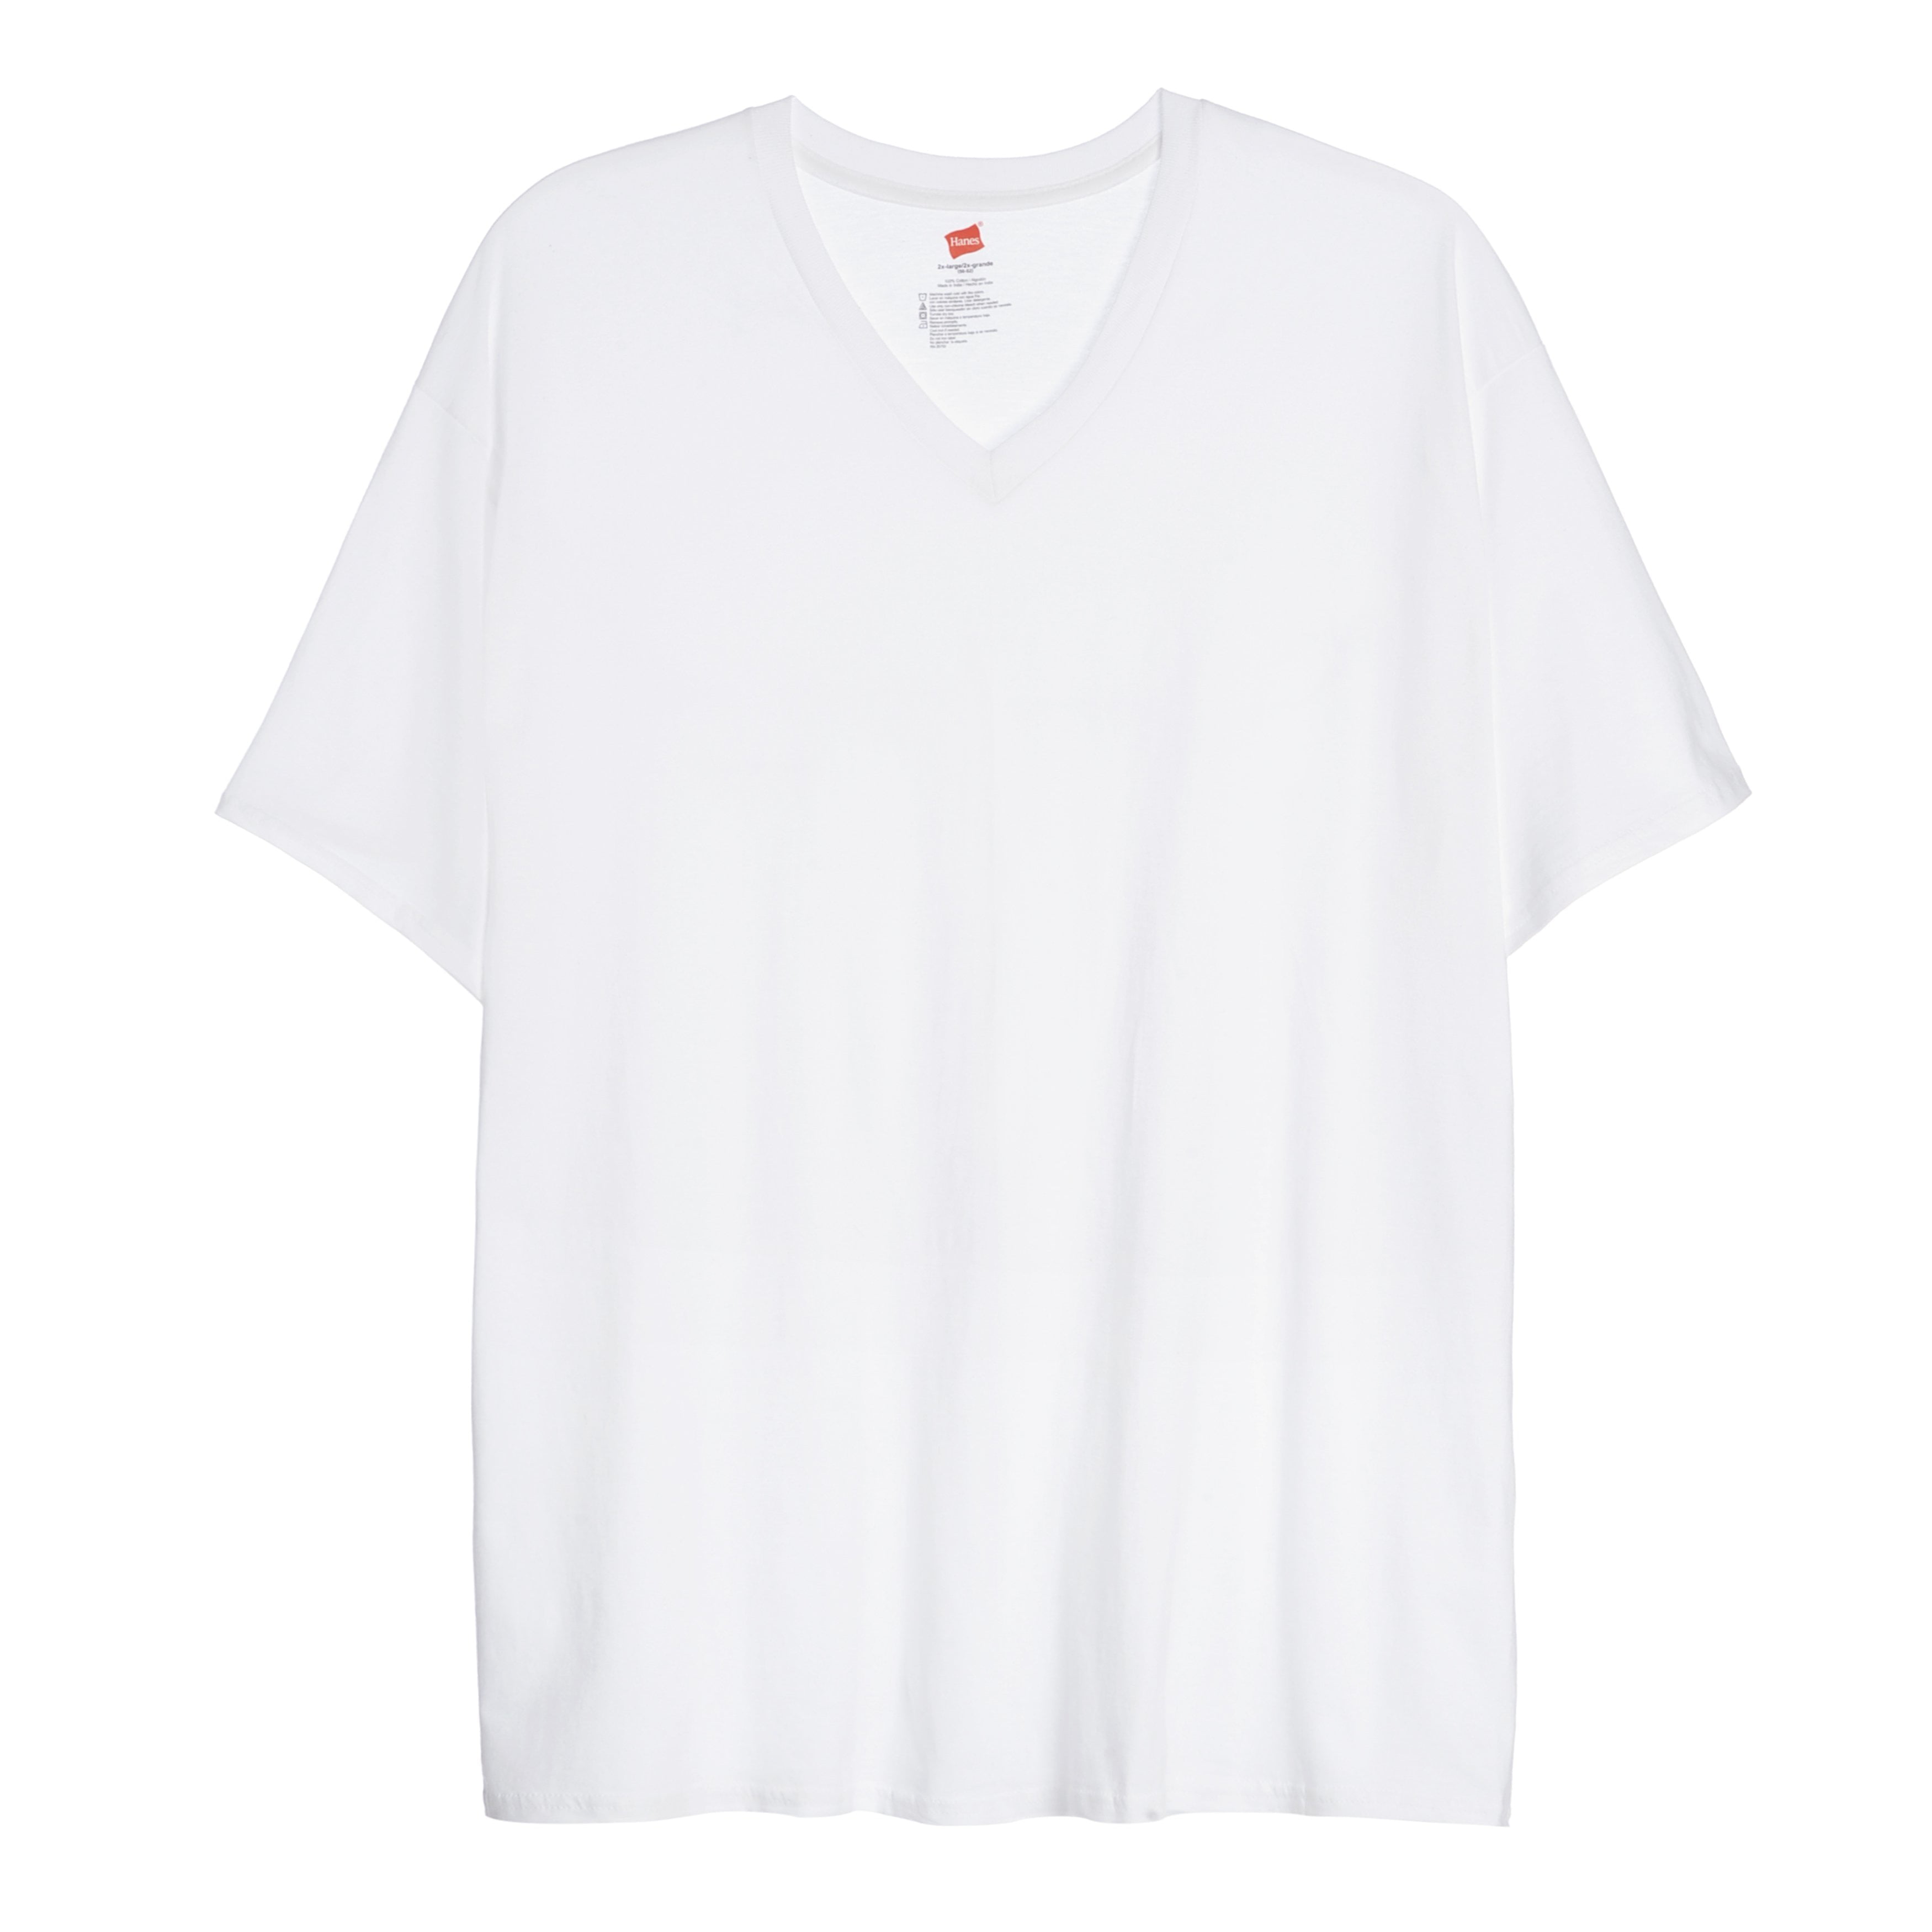 Hanes - Hanes Men's Ultimate Big and Tall V-Neck T-Shirt (Pack of 3 ...